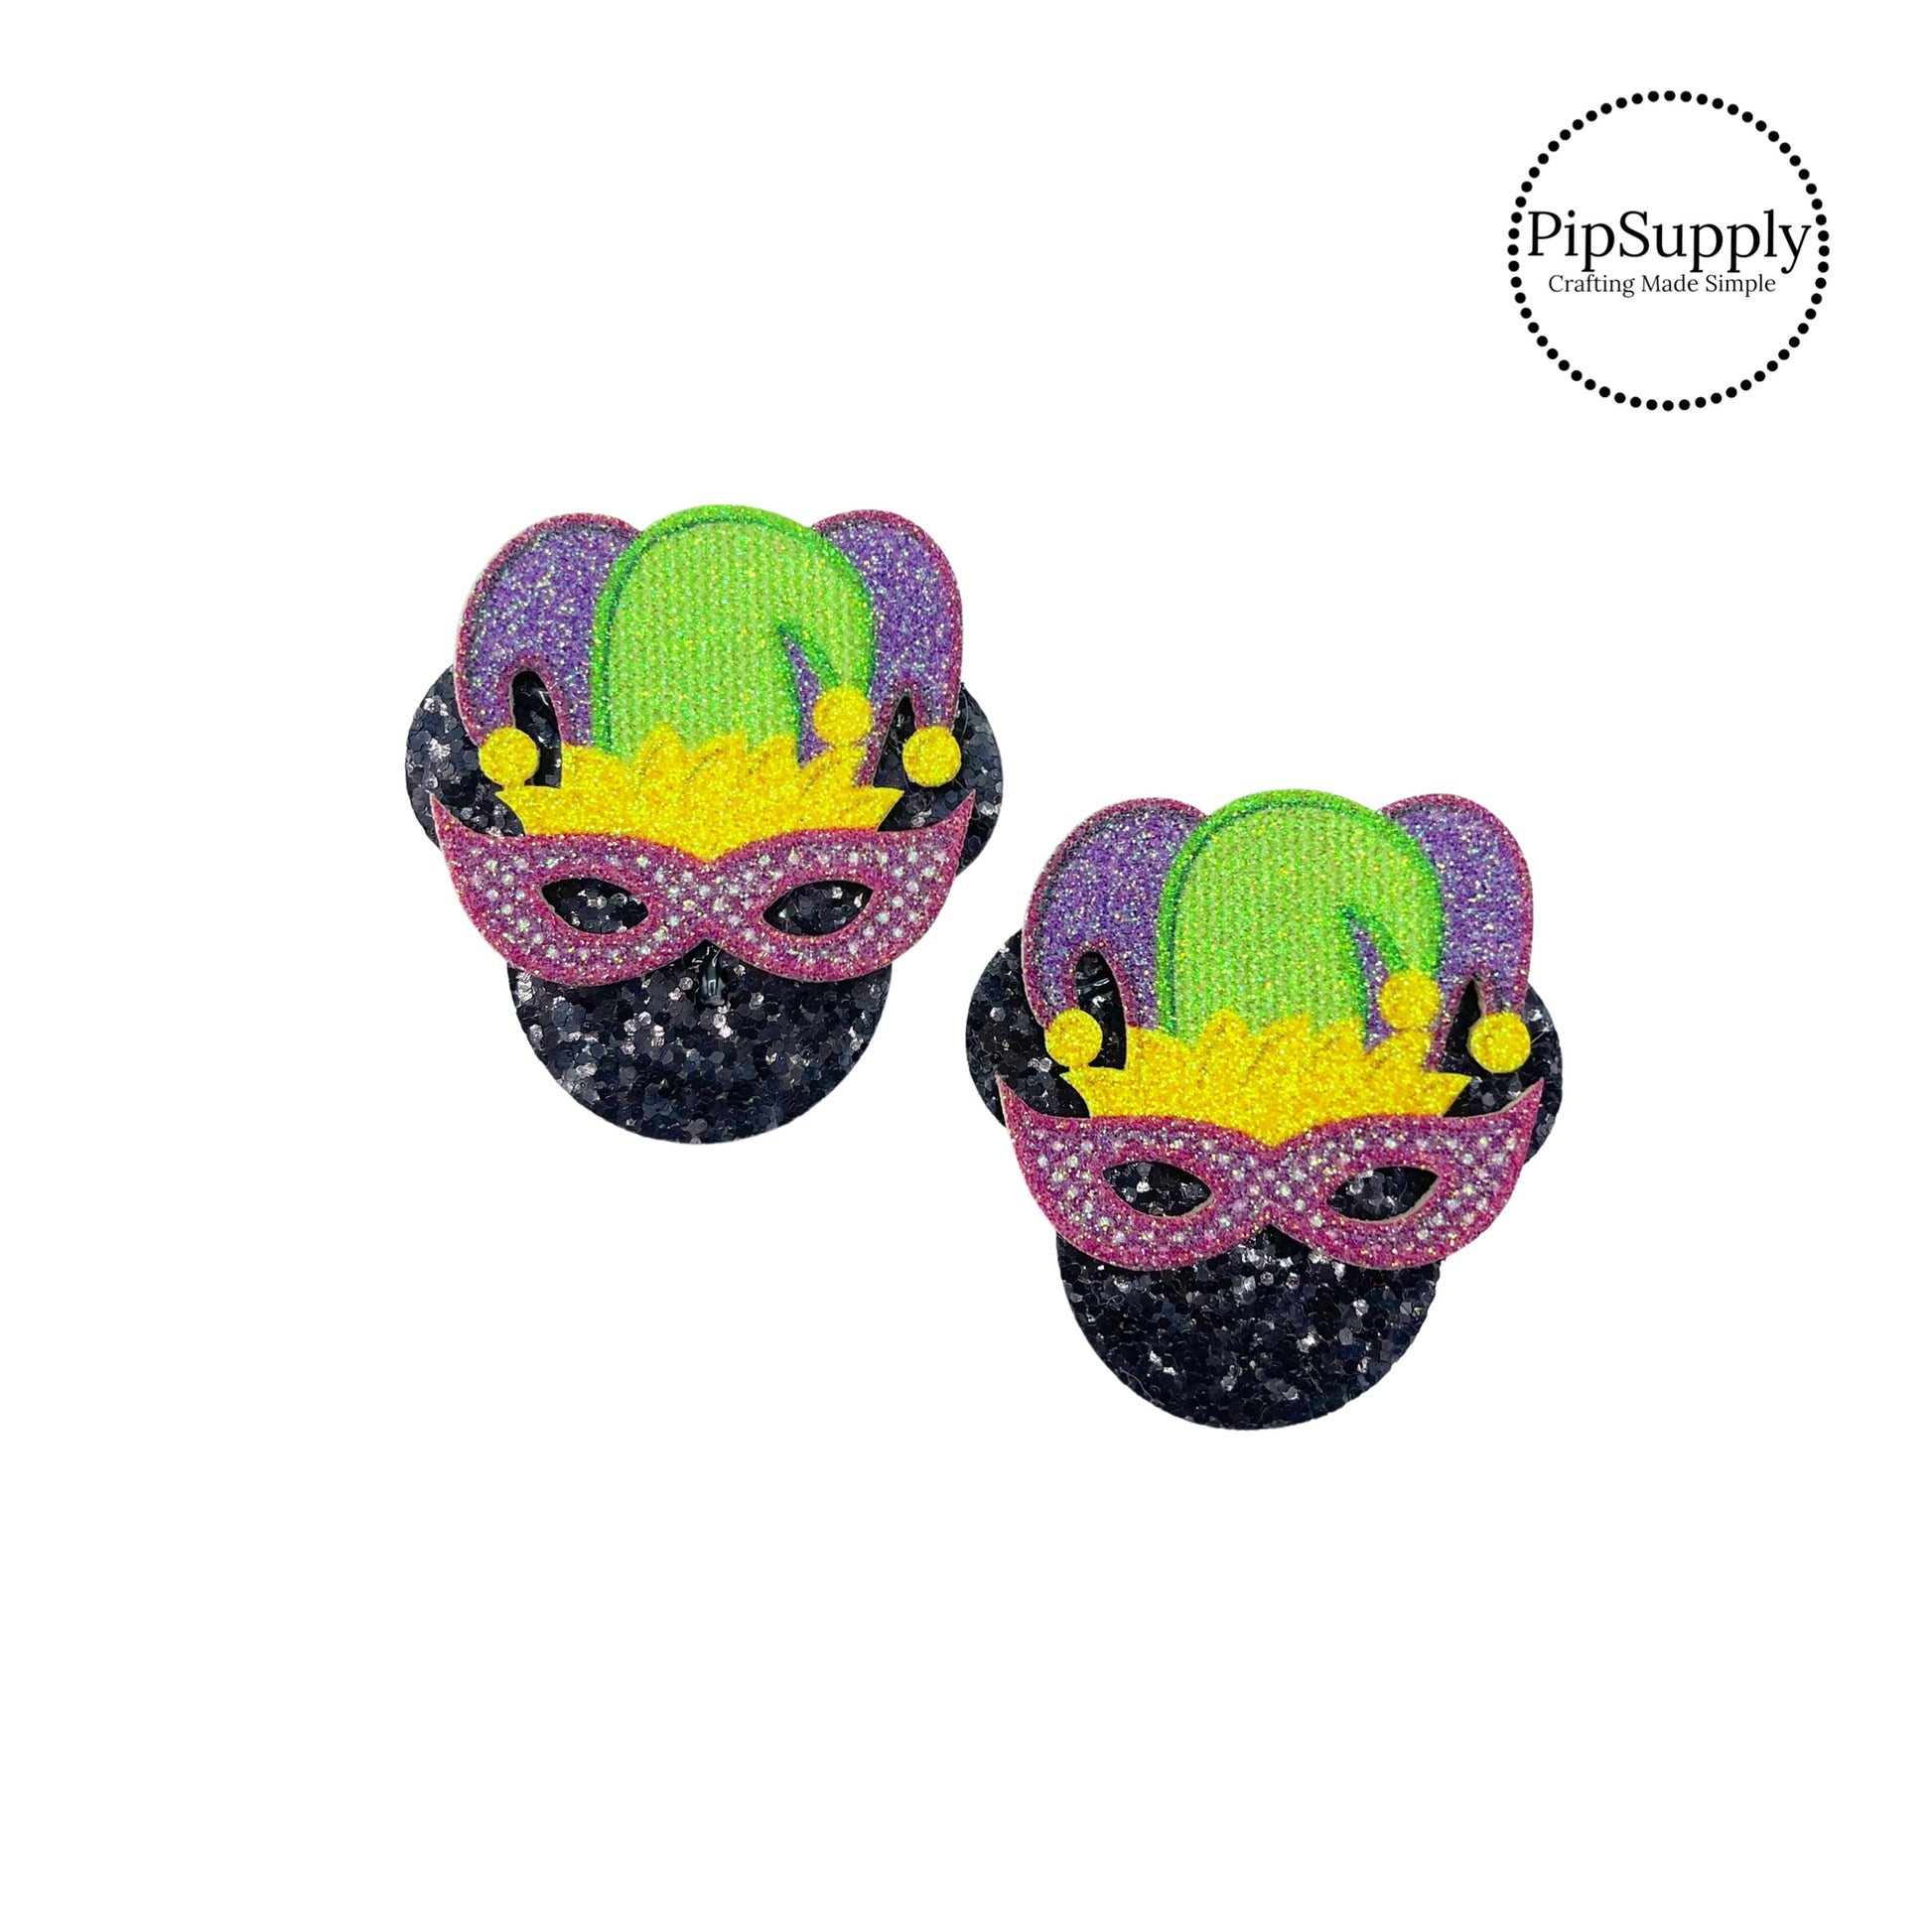 Black glitter mouse head with purple and green mask and hat embellishment